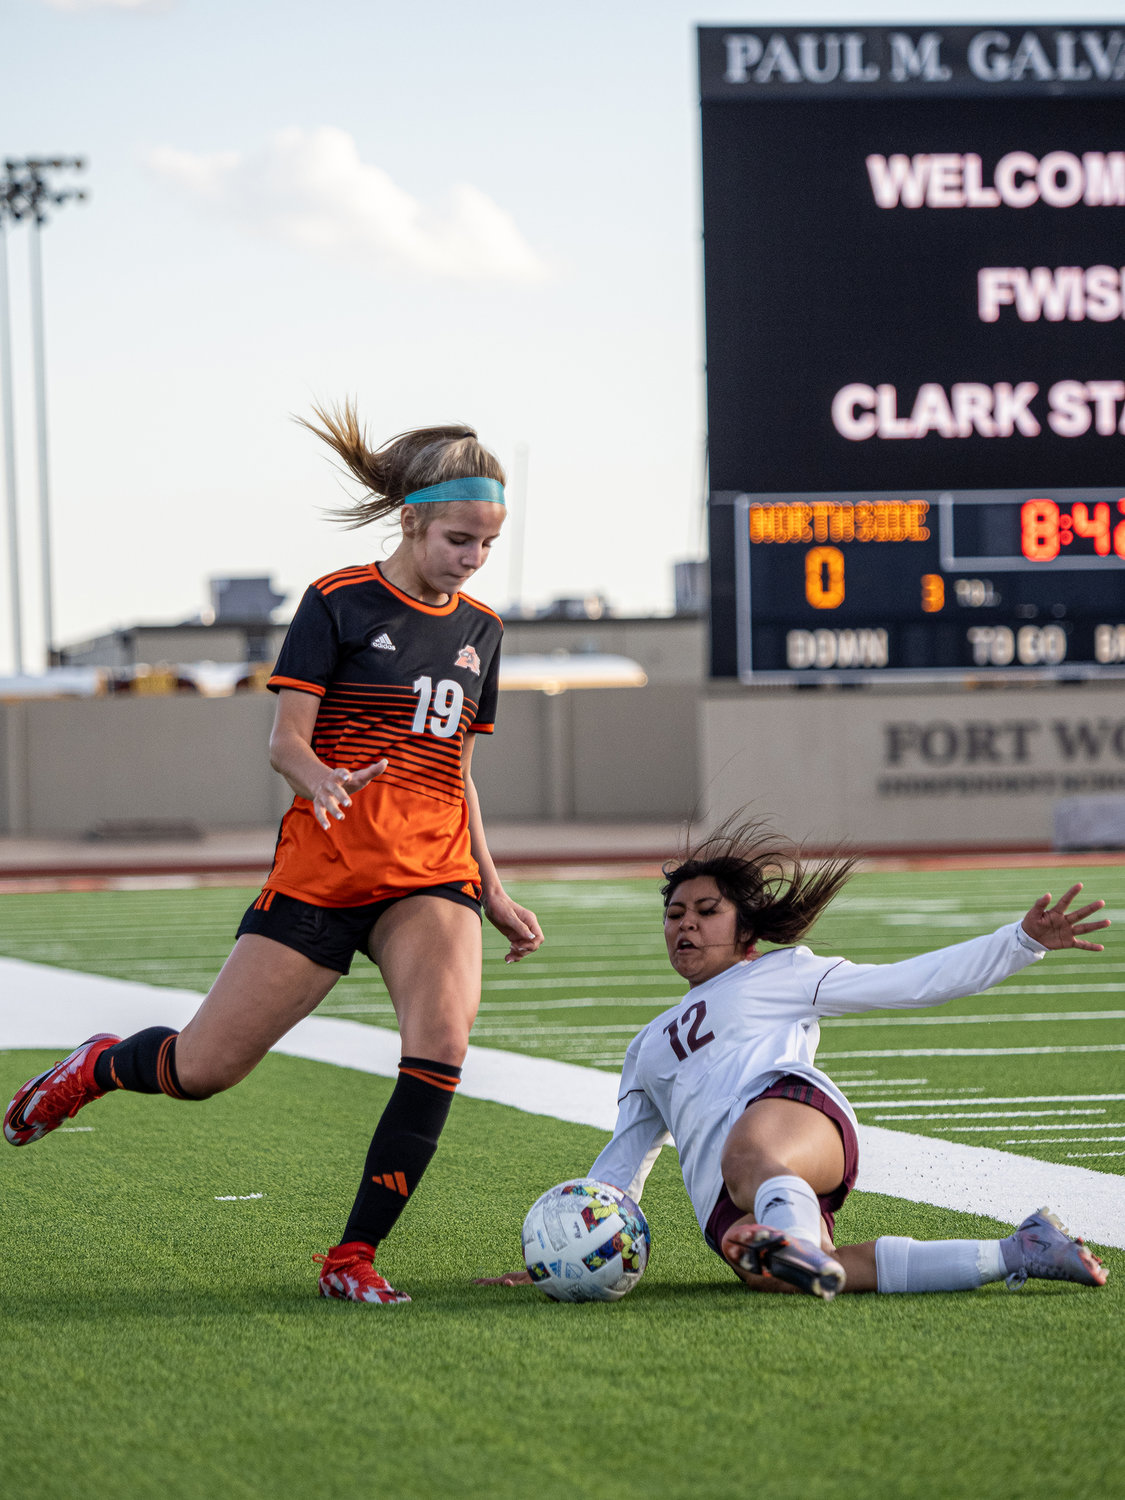 Saddie Smith works around a sliding Northside defender in the Ladycats 6-0 rout over Northside in a grueling bi-district match.